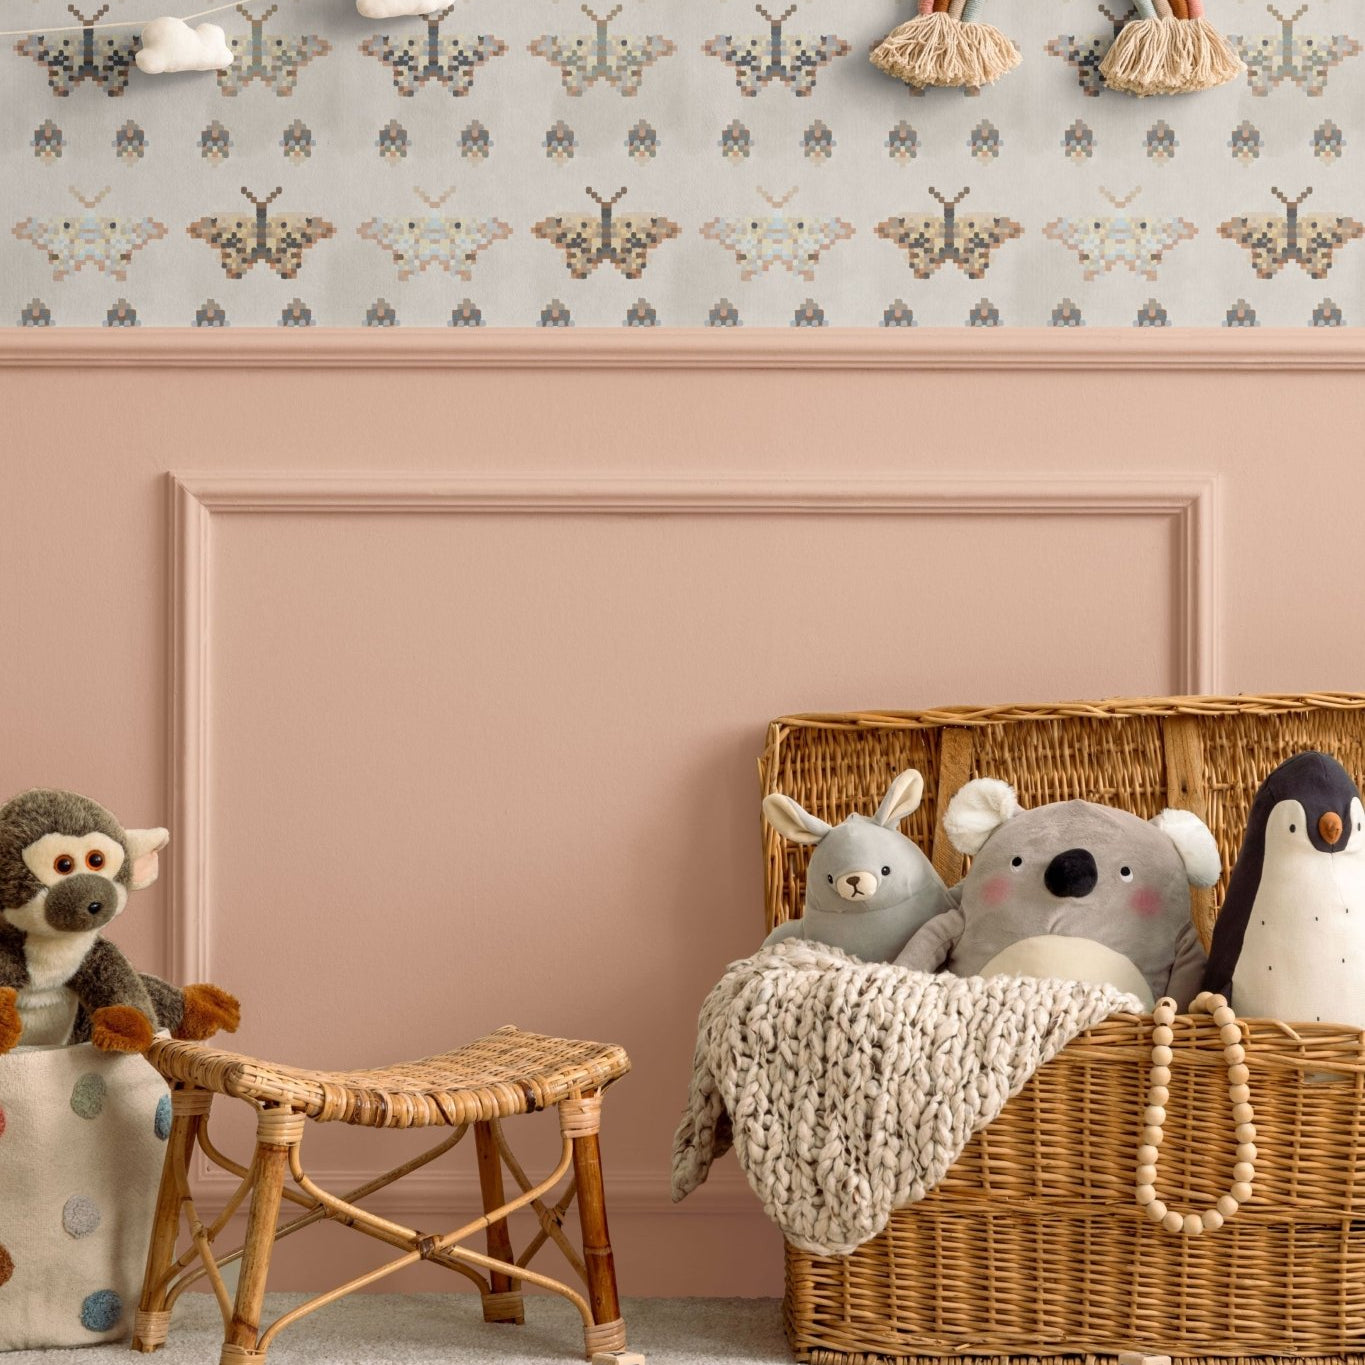 Cozy children's room with mosaic butterfly wallpaper in pastel and earthy tones. The room features a wicker toy basket with plush animals, a rattan stool, and a pink wall with a rainbow decoration and cloud garland, creating a warm, playful space